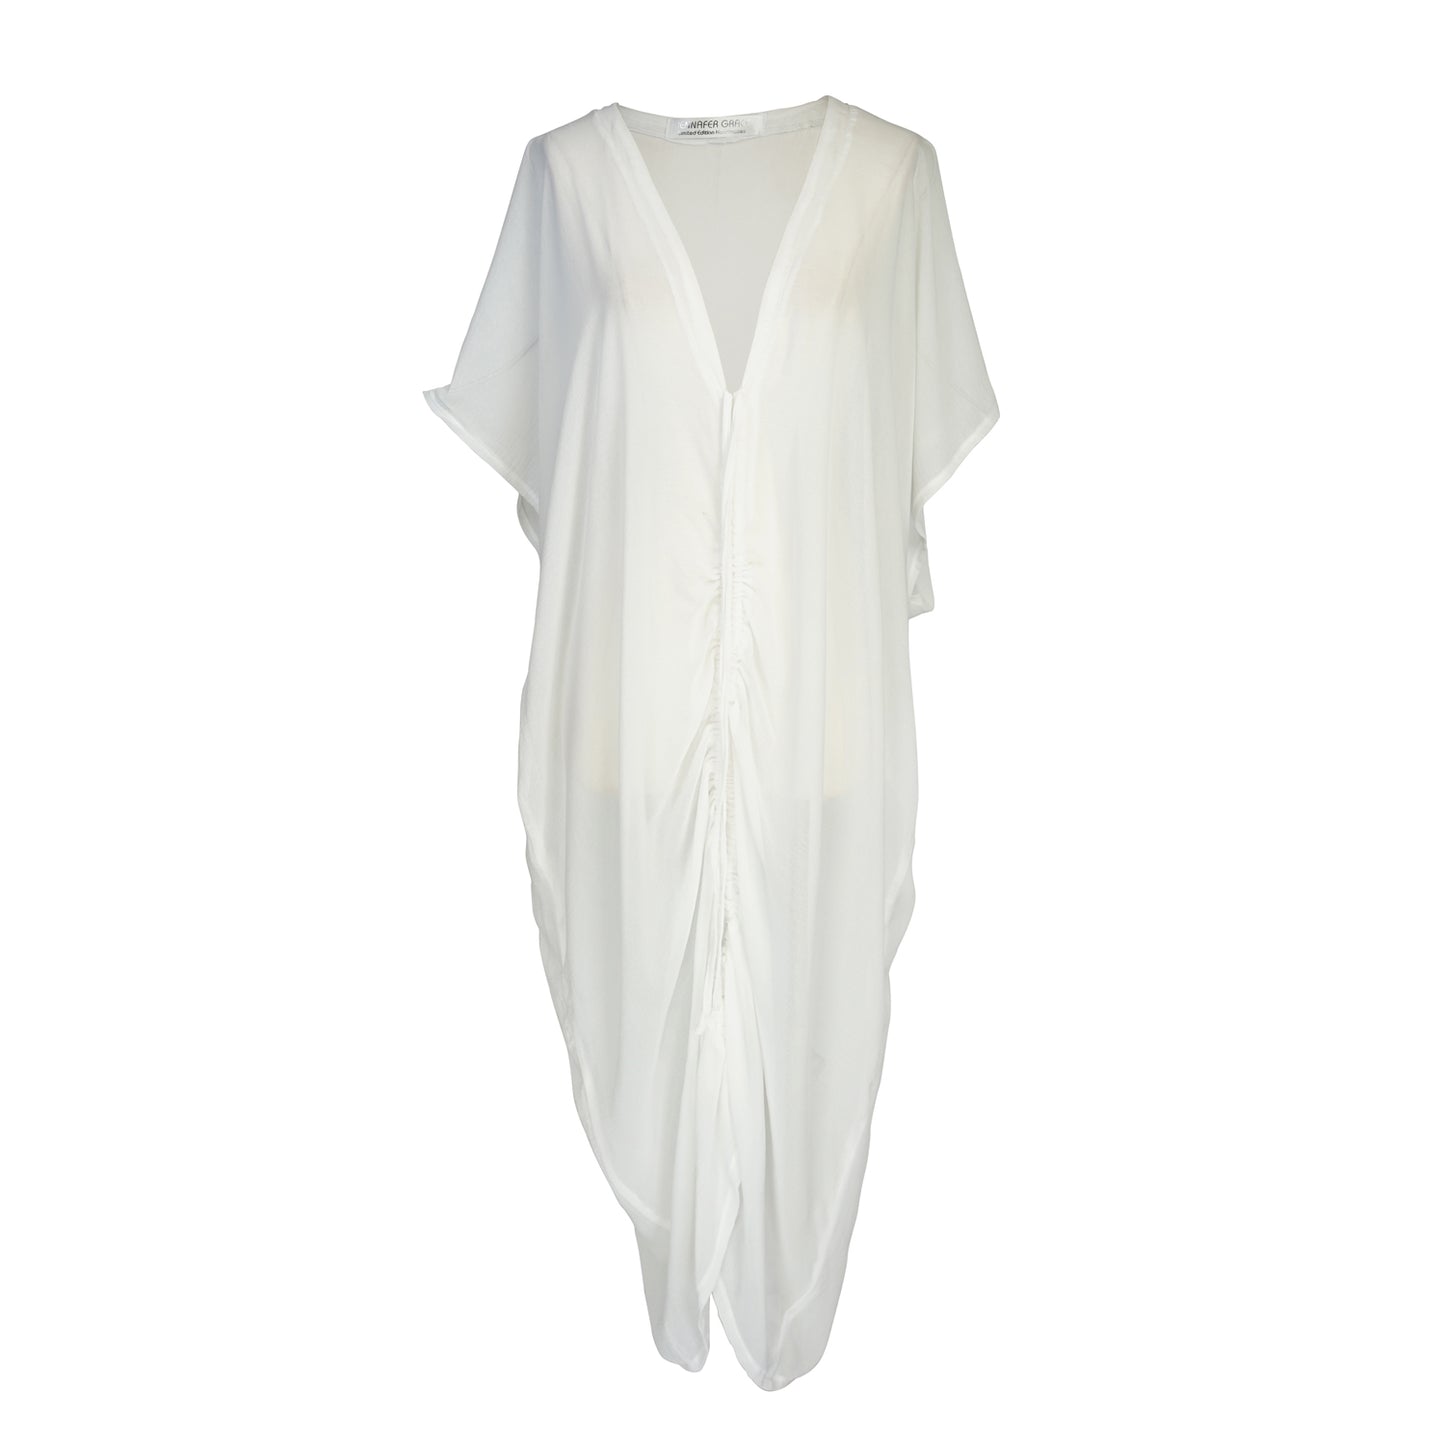 White semi sheer chiffon caftan. This solid color piece features a deep v-neck, batwing sleeve, a center drawstring for ruche styling, and ankle length hem. 